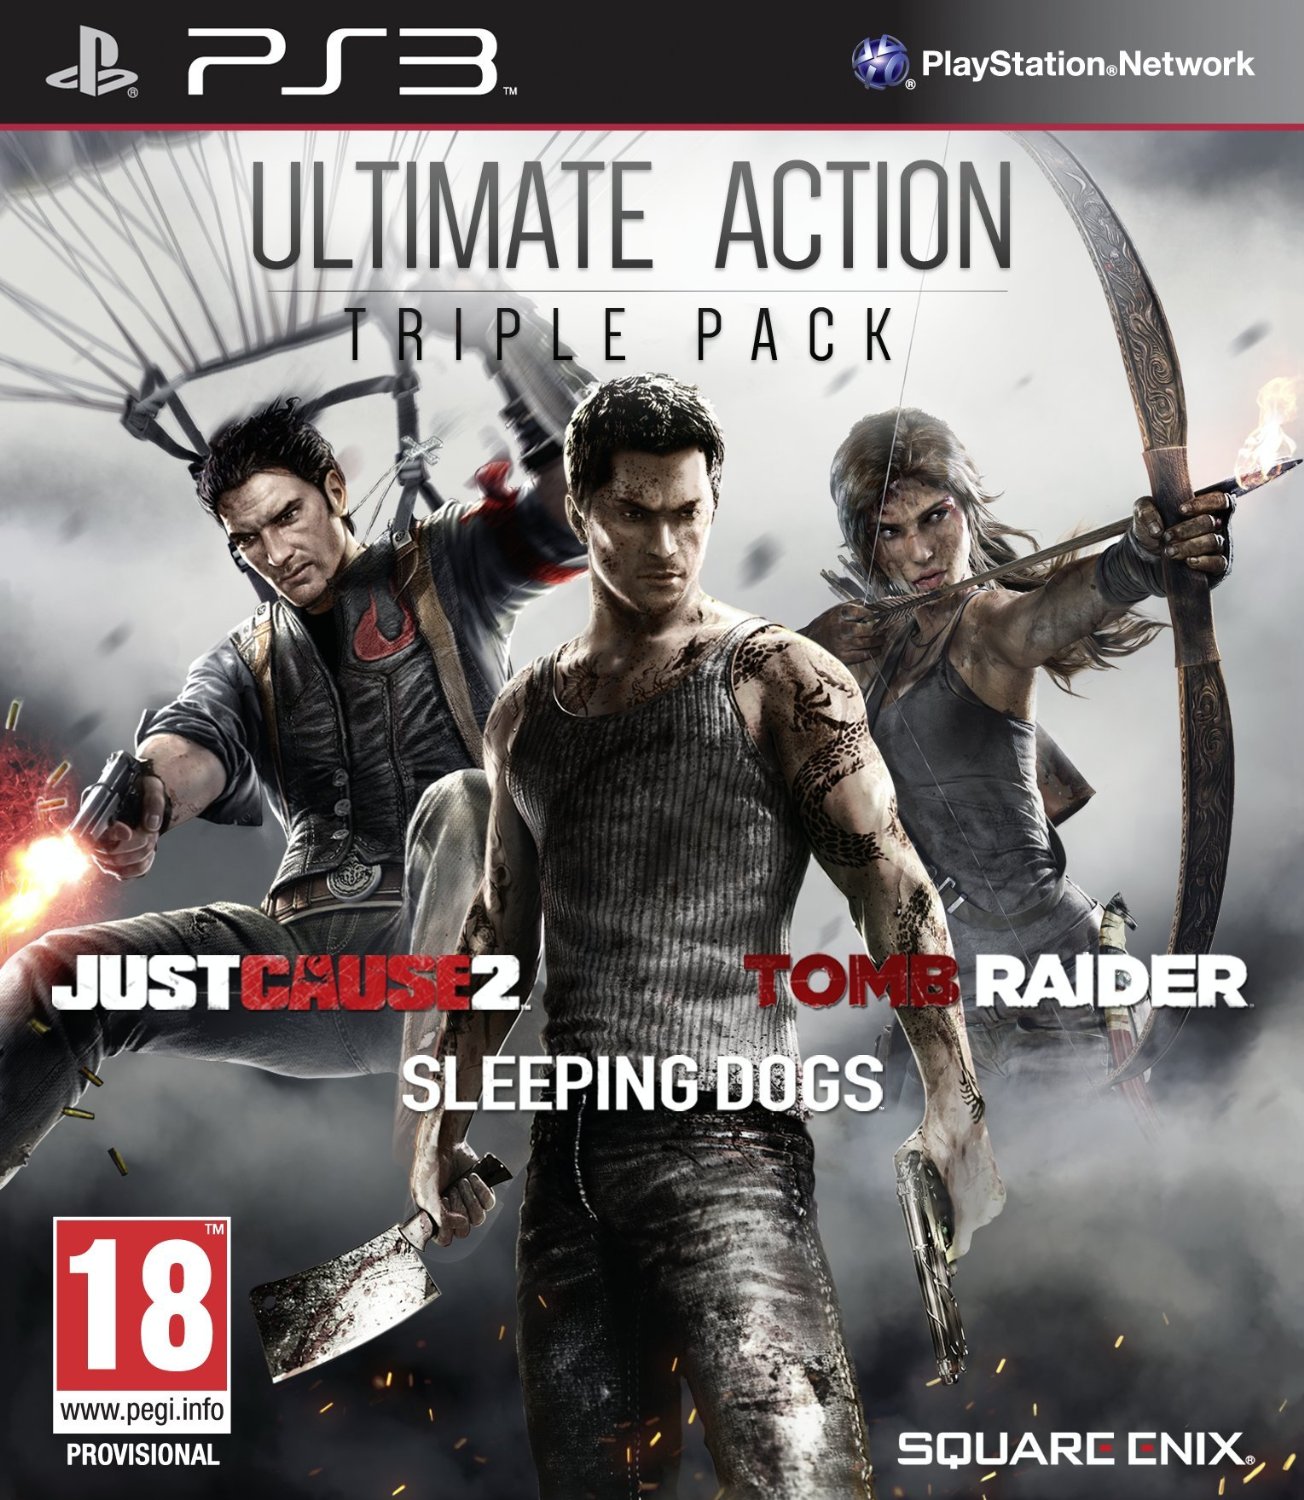 Ultimate Action Triple Pack for PS3 to rent